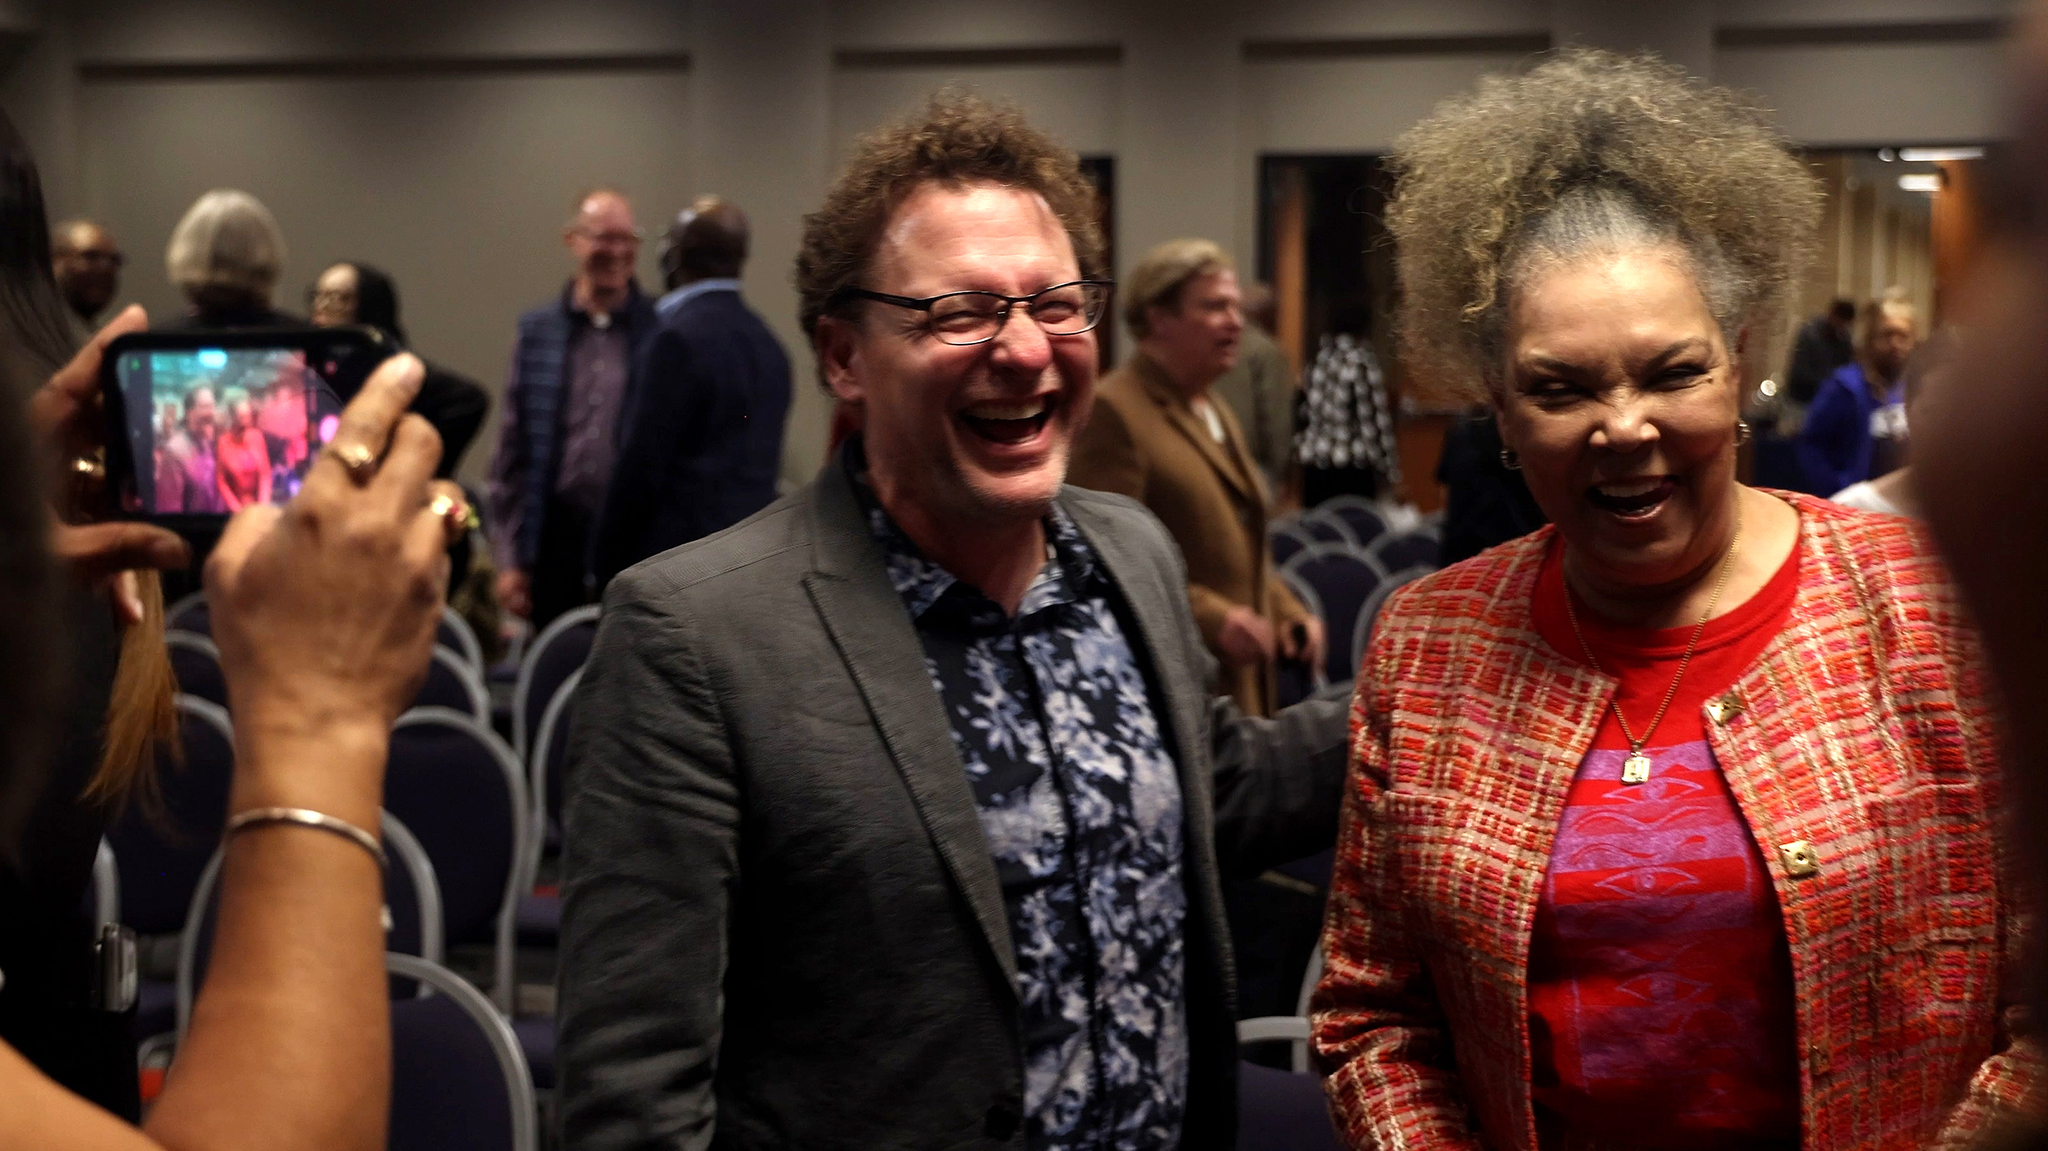 udy Meredith (right) talks with audience members following her keynote address for the university’s observance of Black History Month on Feb. 16 in the Gertrude C. Ford Ole Miss Student Union Ballroom. Photo by Sam McGlone/University Marketing and Communications